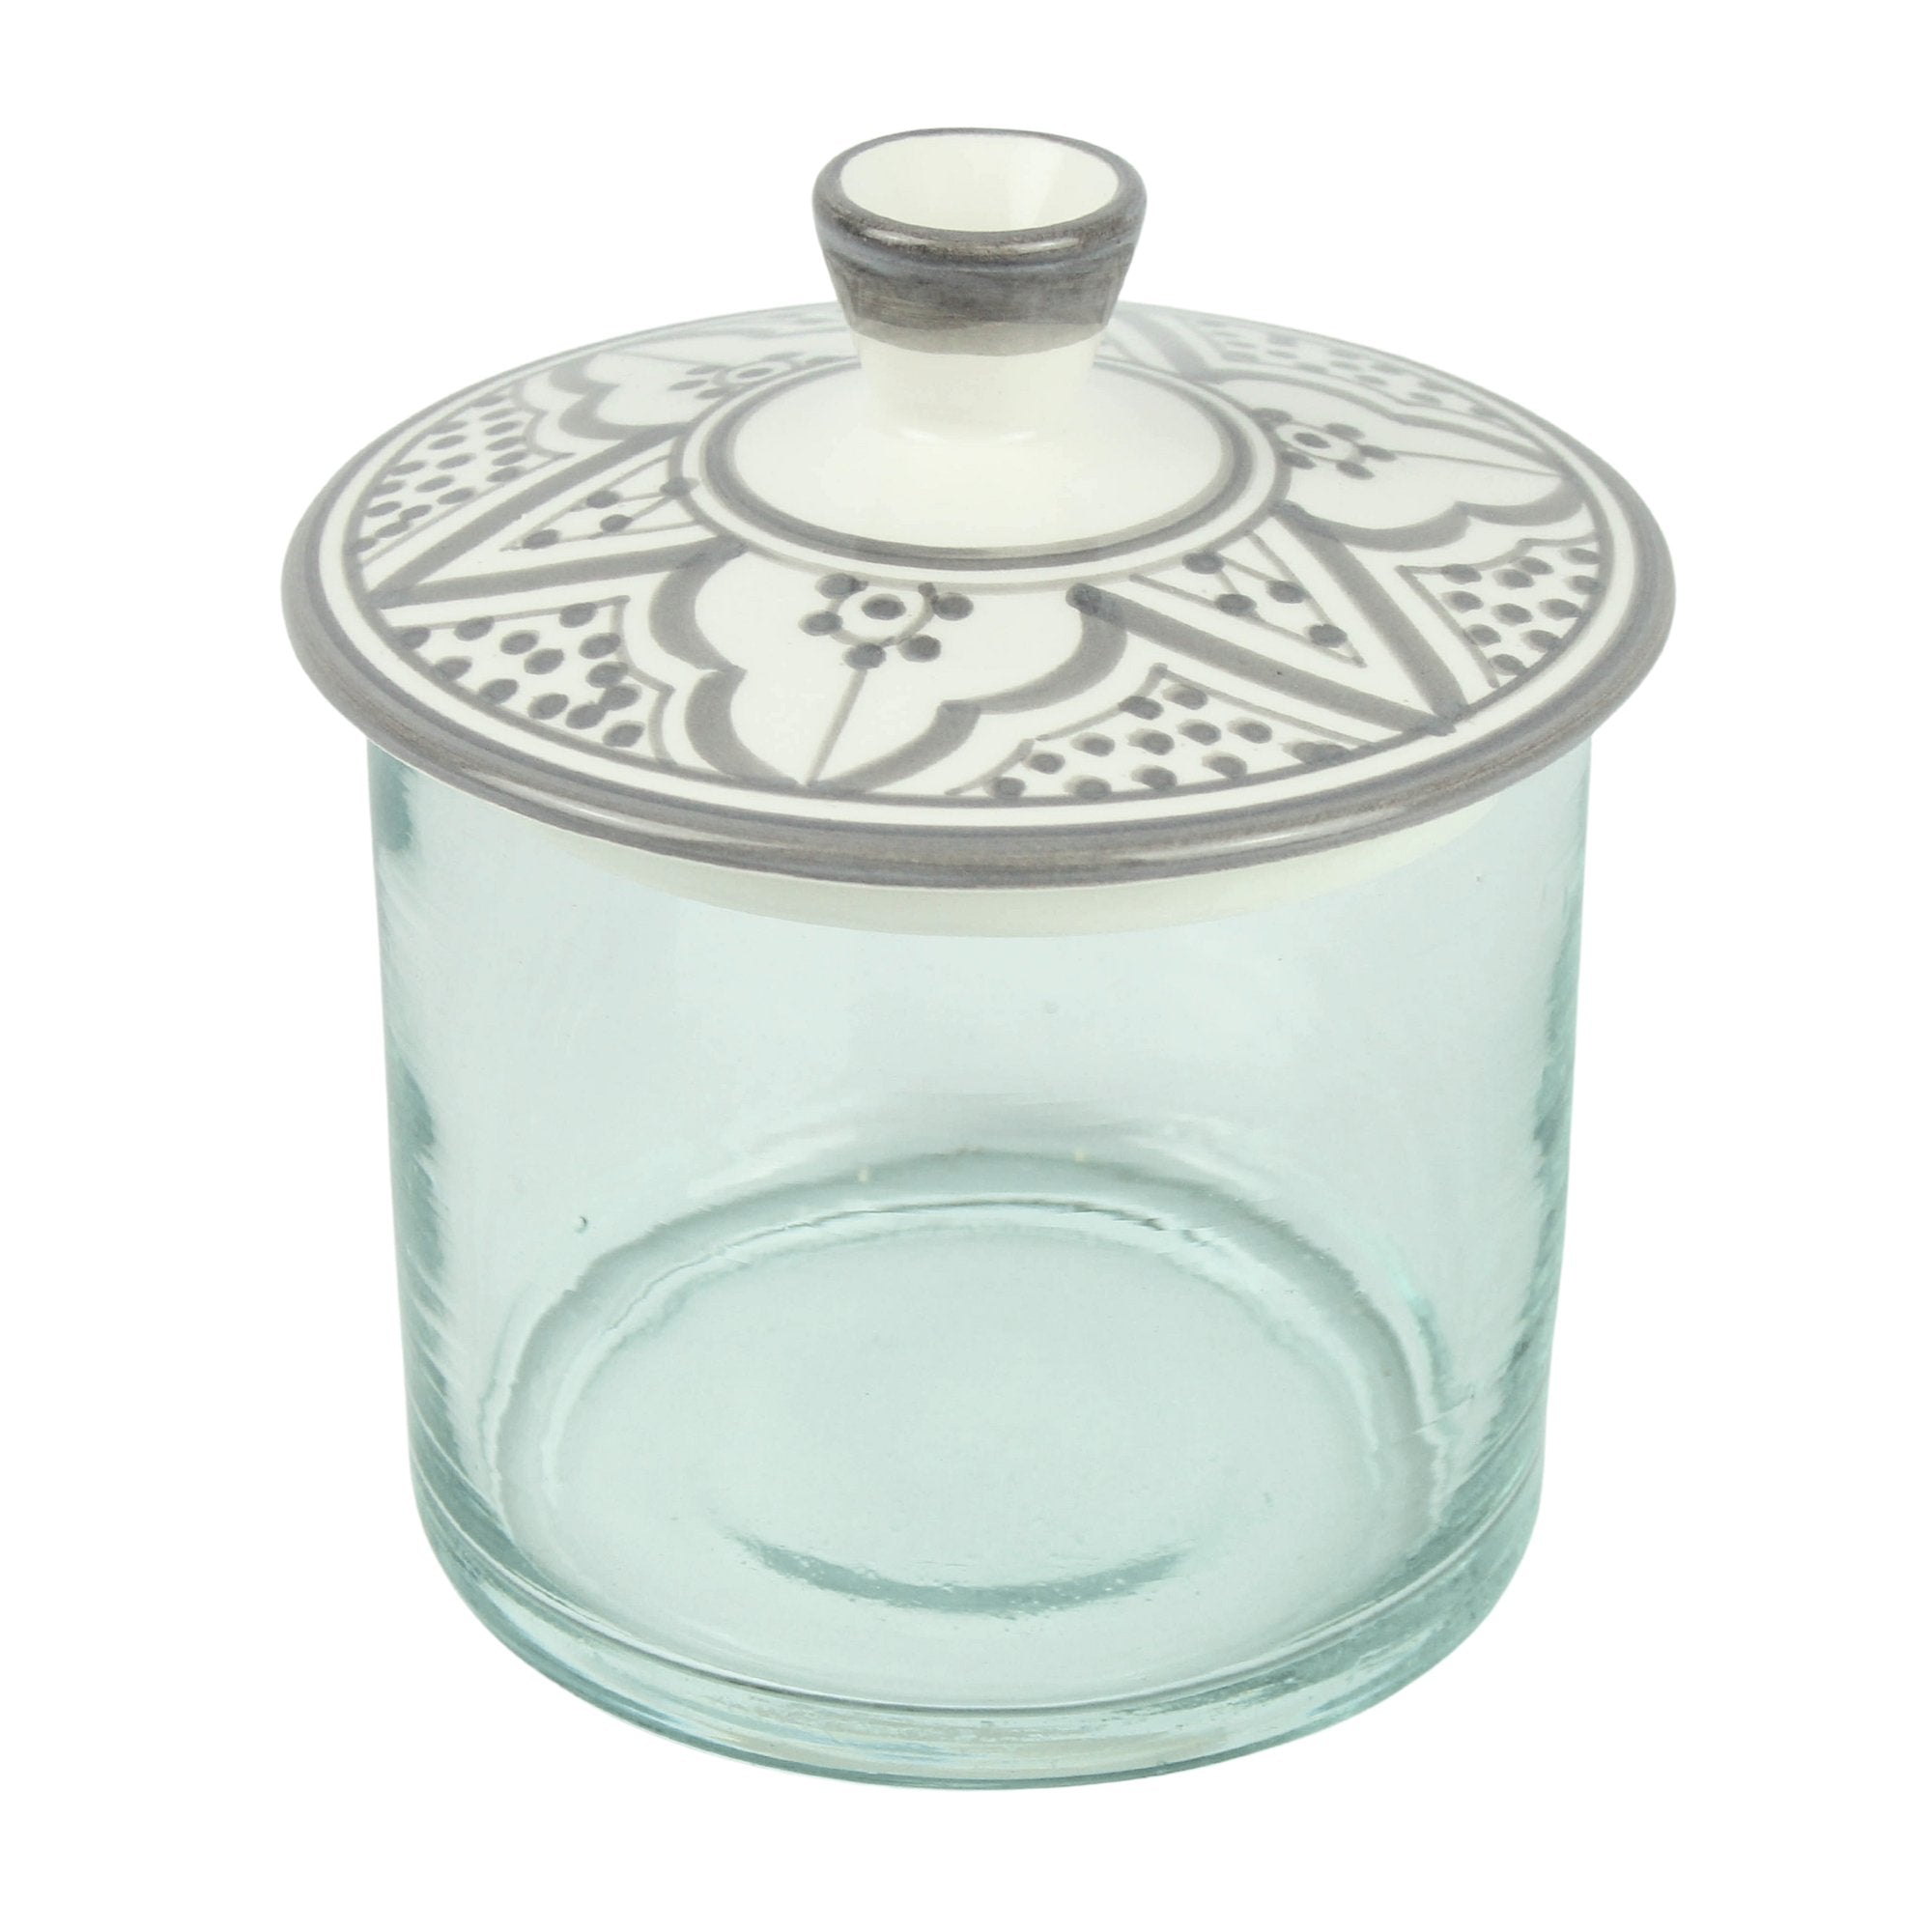 Glass Jar with Patterned Ceramic Lid - Artisan Stories